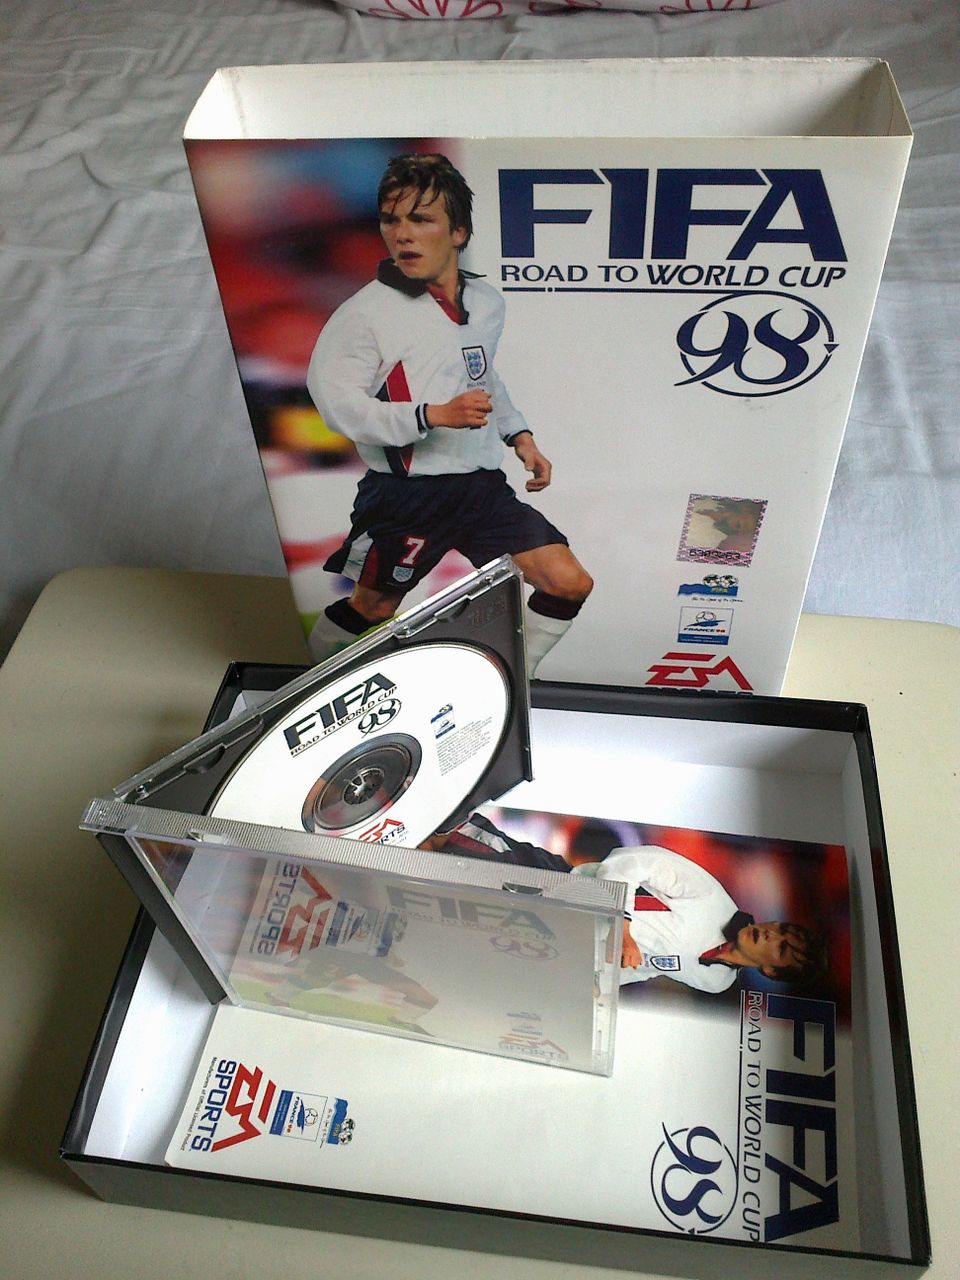 FIFA 98 (Road to World Cup) PC Big Box